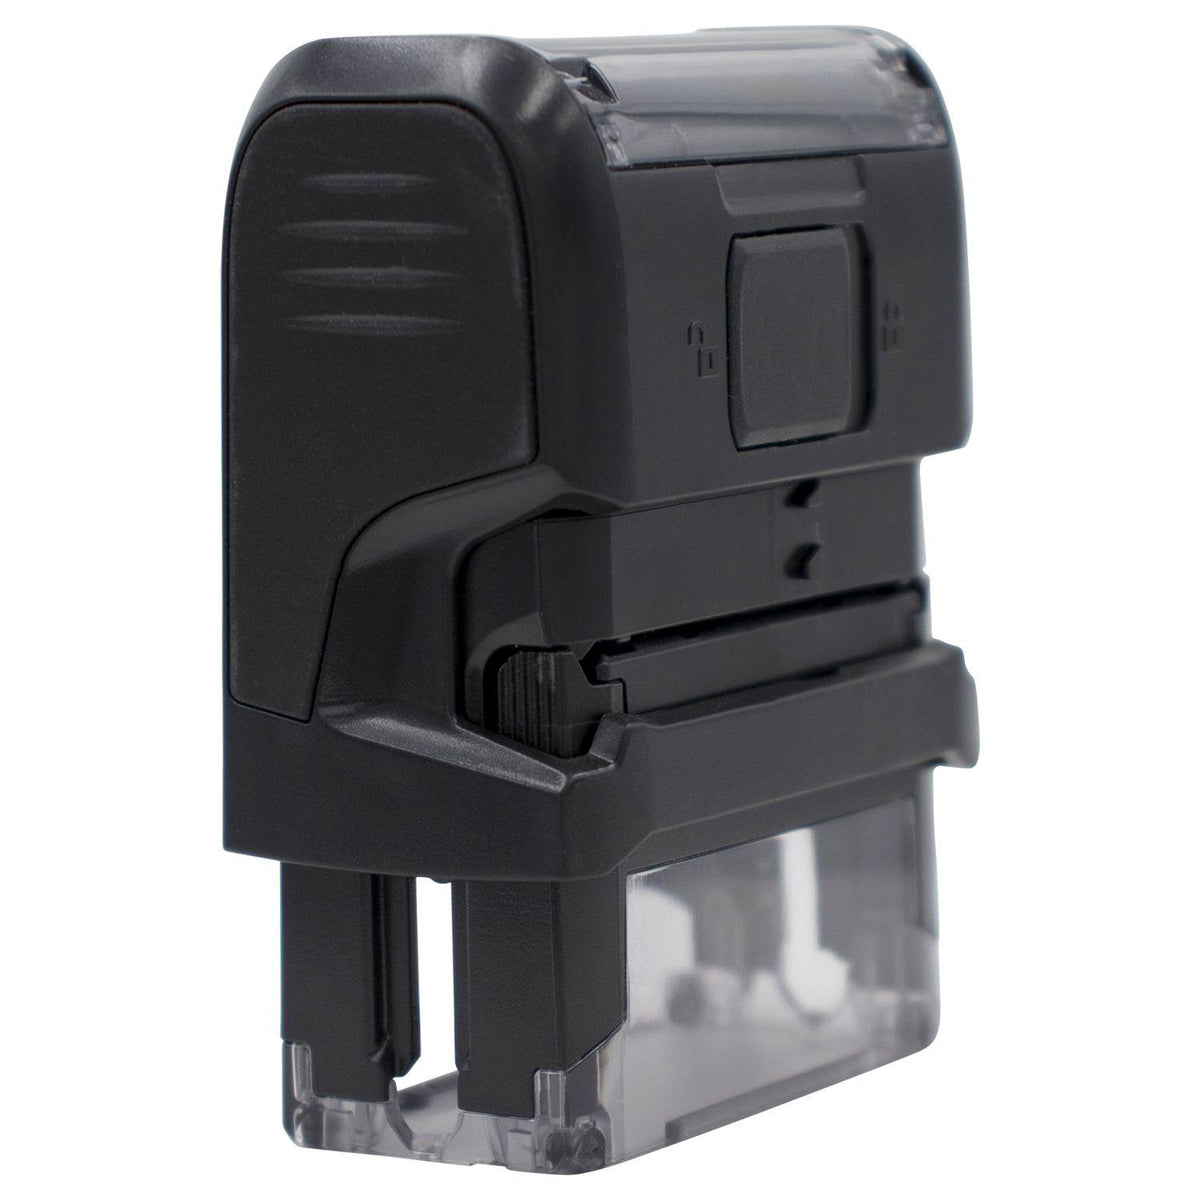 Self Inking Hold Notice Stamp - Engineer Seal Stamps - Brand_Trodat, Impression Size_Small, Stamp Type_Self-Inking Stamp, Type of Use_Business, Type of Use_Office